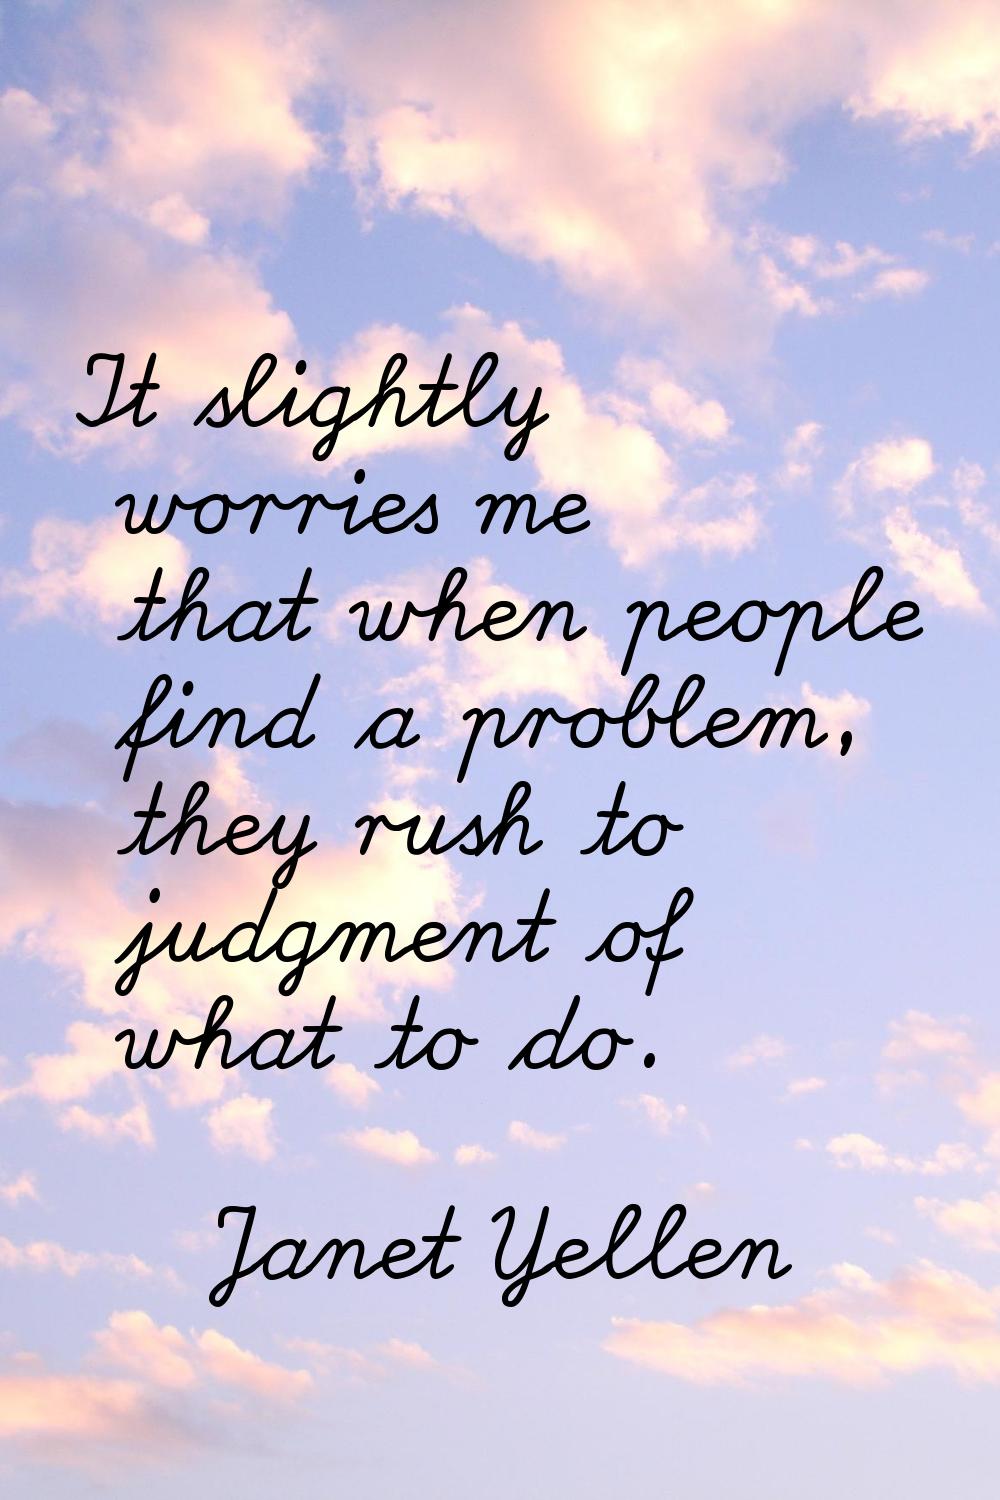 It slightly worries me that when people find a problem, they rush to judgment of what to do.